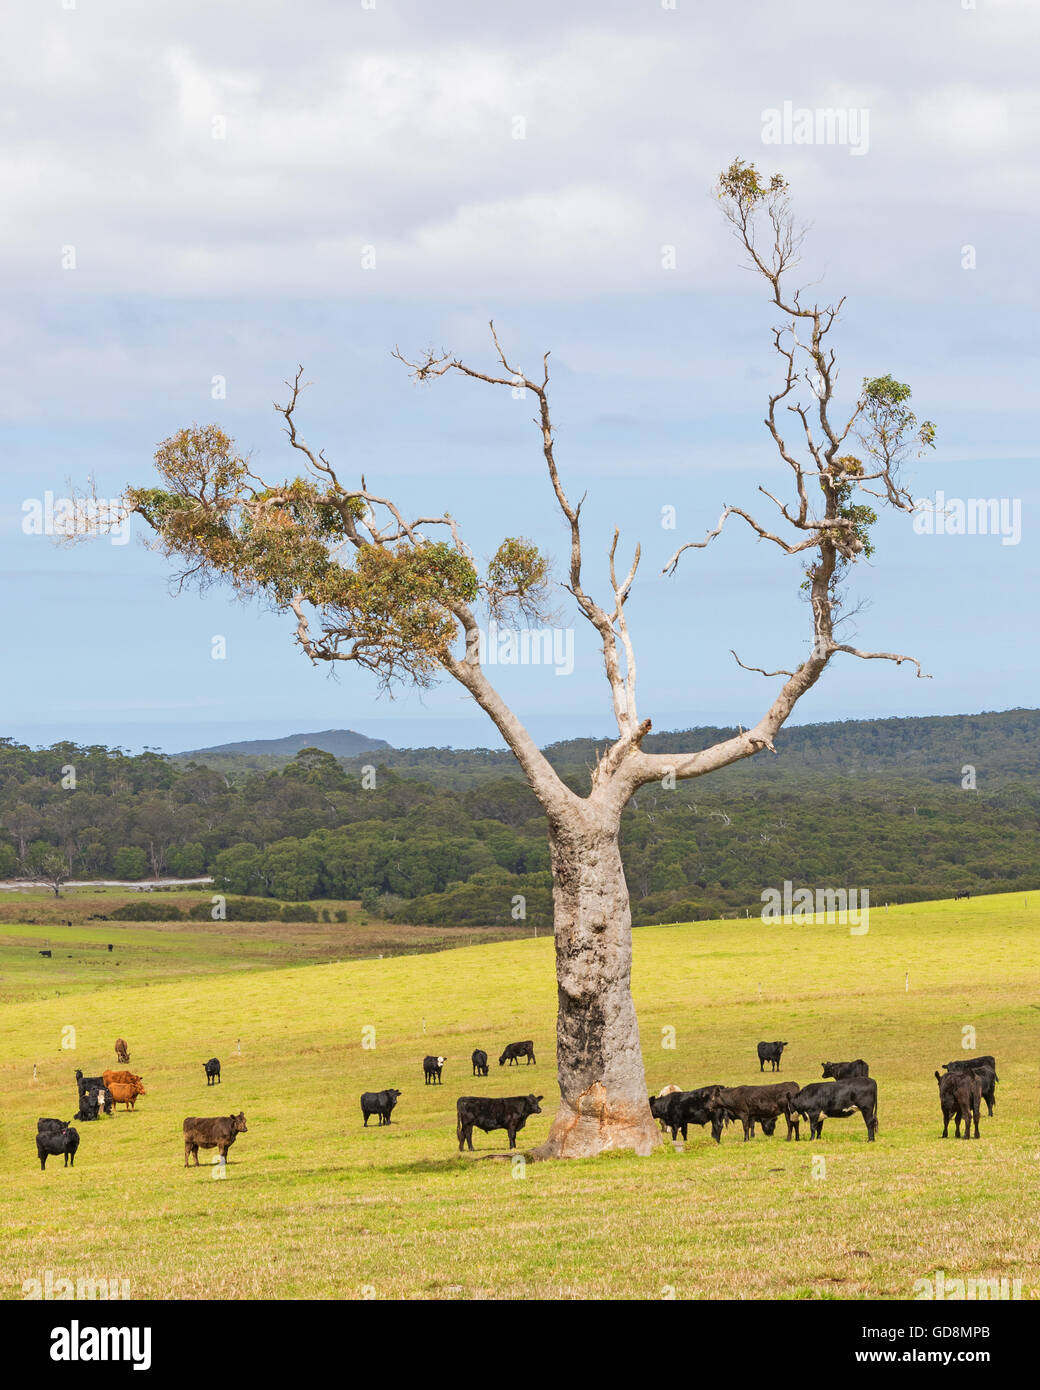 A cattle farm near the towns of Nornalup and Walpole in Western Australia. Stock Photo